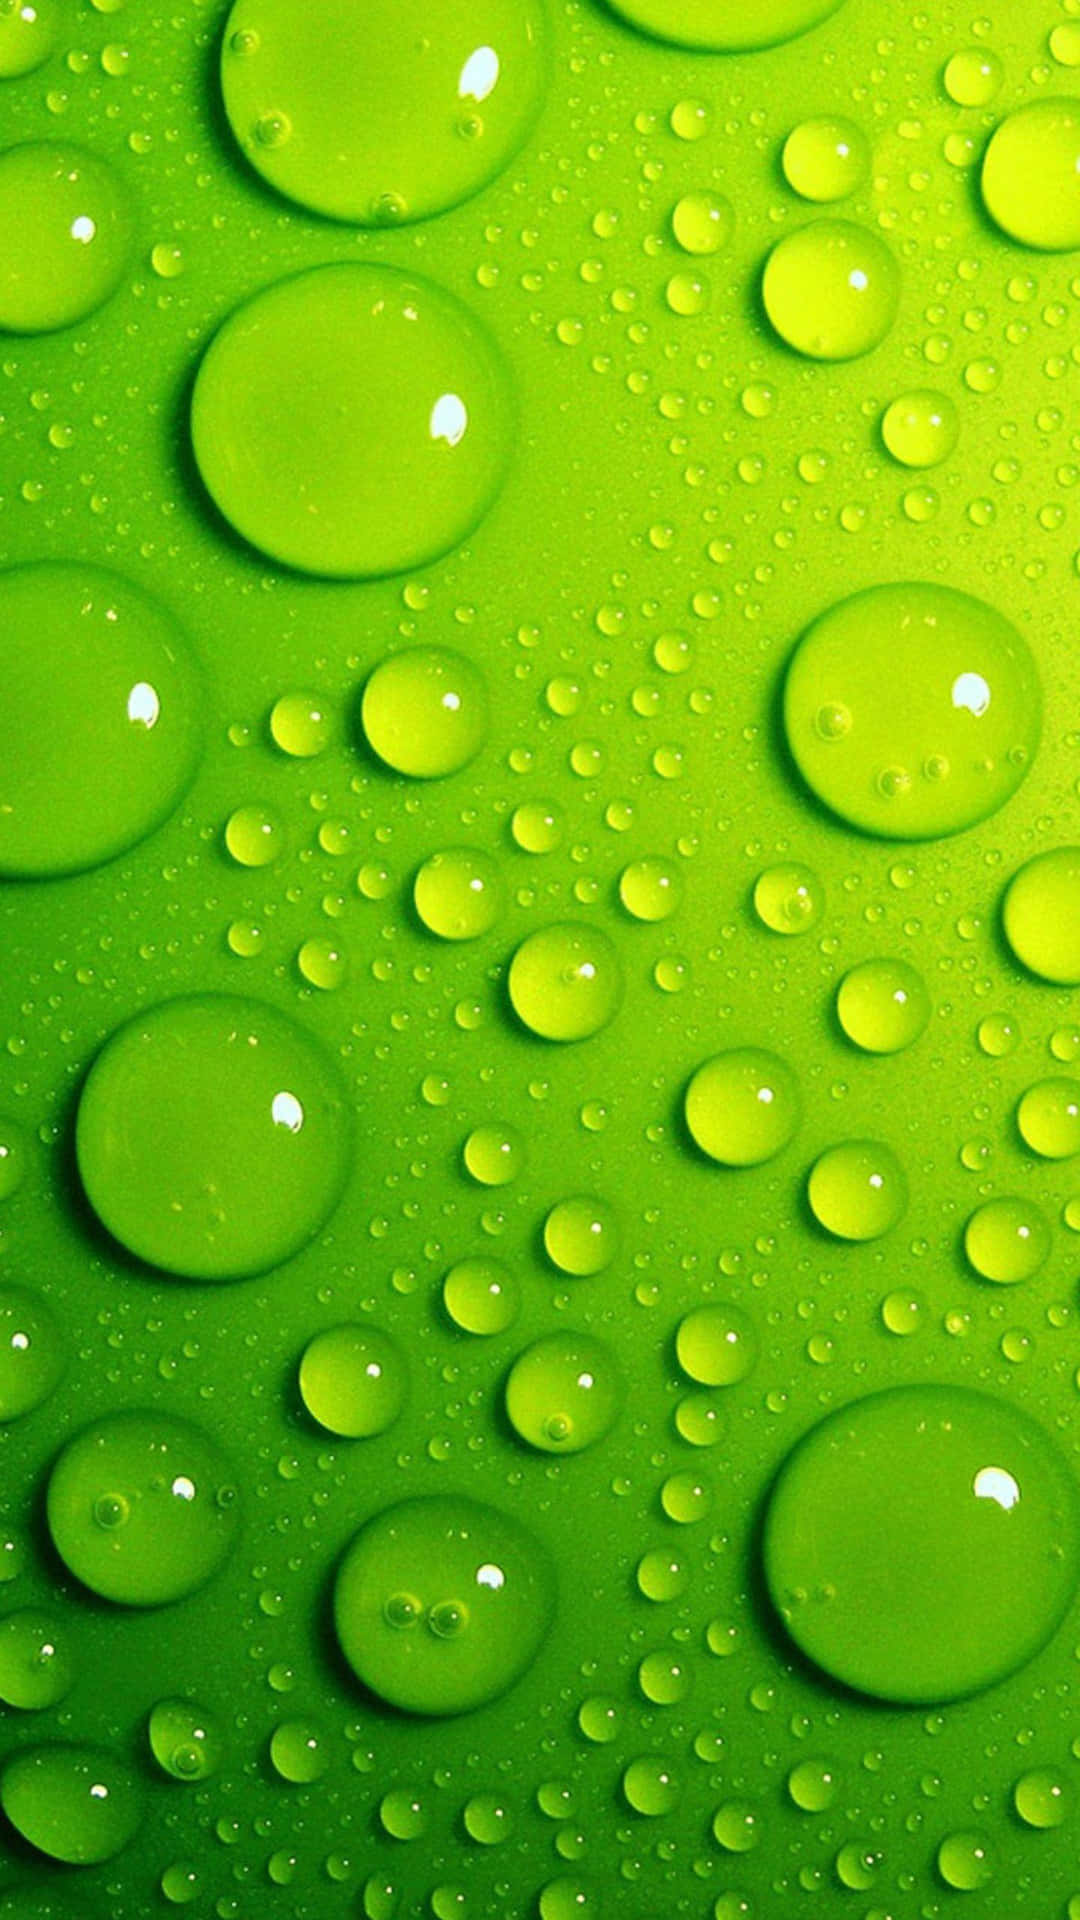 Green Water Droplets On A Surface